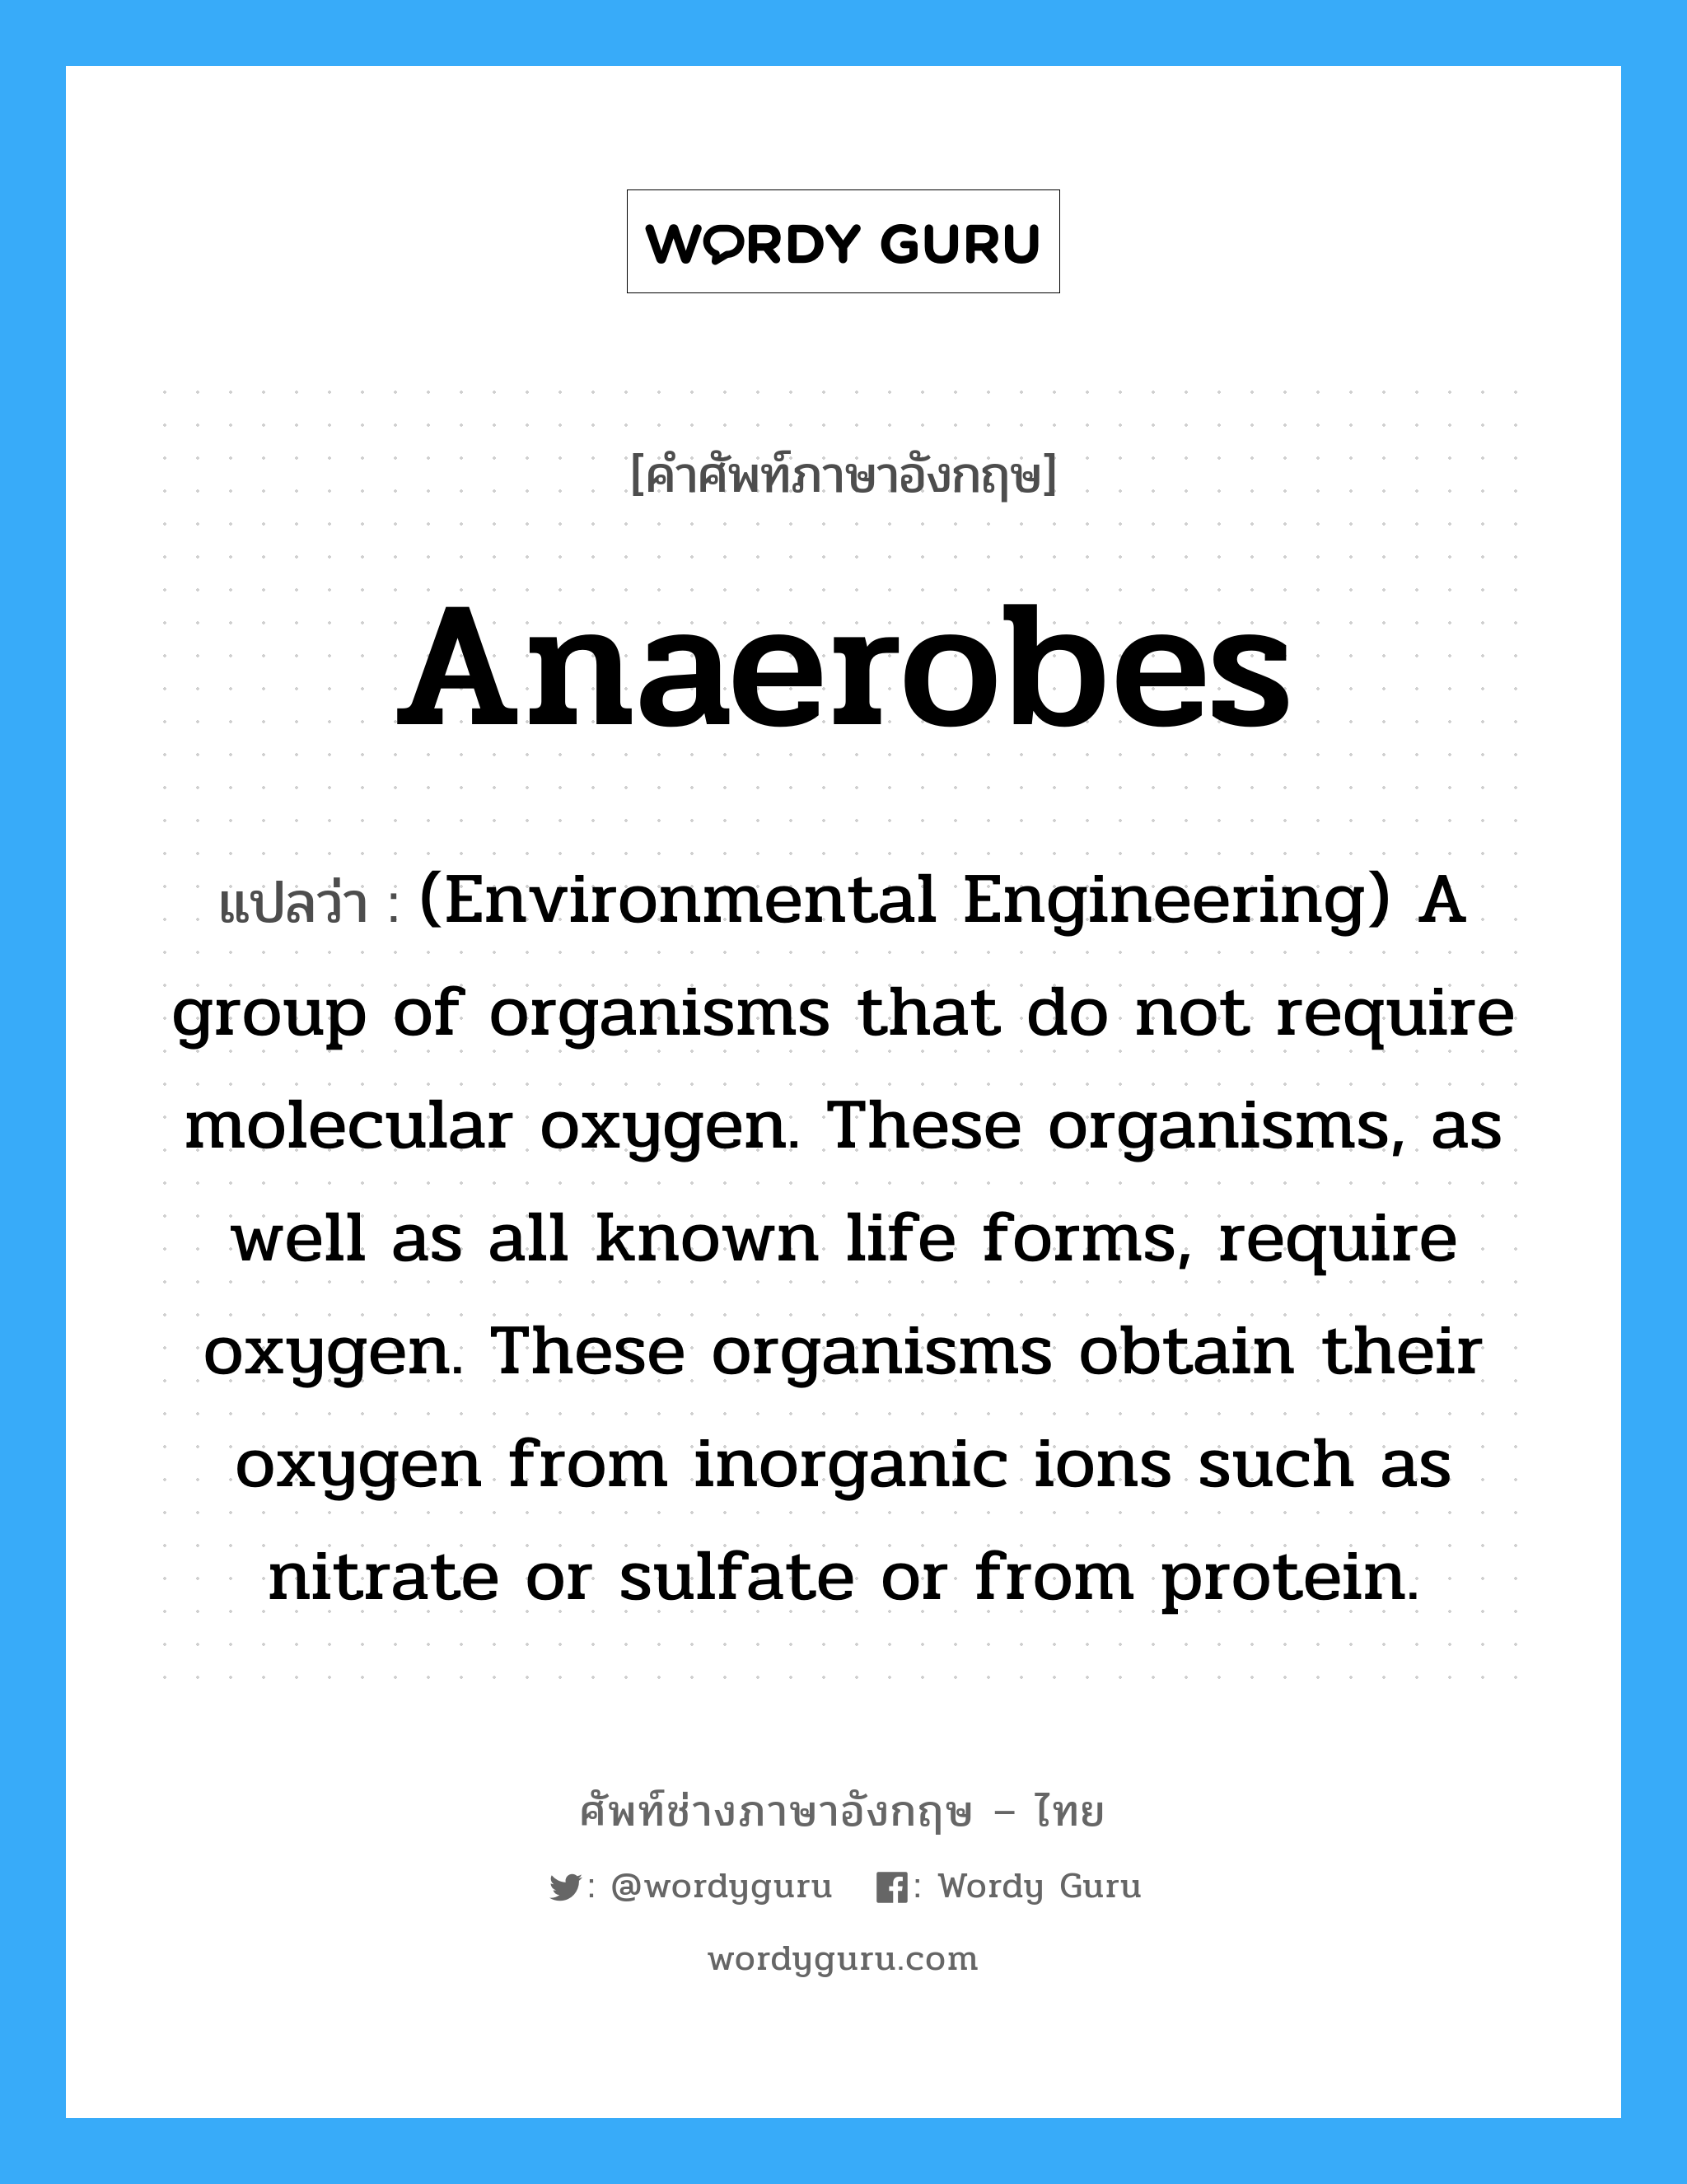 Anaerobes แปลว่า?, คำศัพท์ช่างภาษาอังกฤษ - ไทย Anaerobes คำศัพท์ภาษาอังกฤษ Anaerobes แปลว่า (Environmental Engineering) A group of organisms that do not require molecular oxygen. These organisms, as well as all known life forms, require oxygen. These organisms obtain their oxygen from inorganic ions such as nitrate or sulfate or from protein.